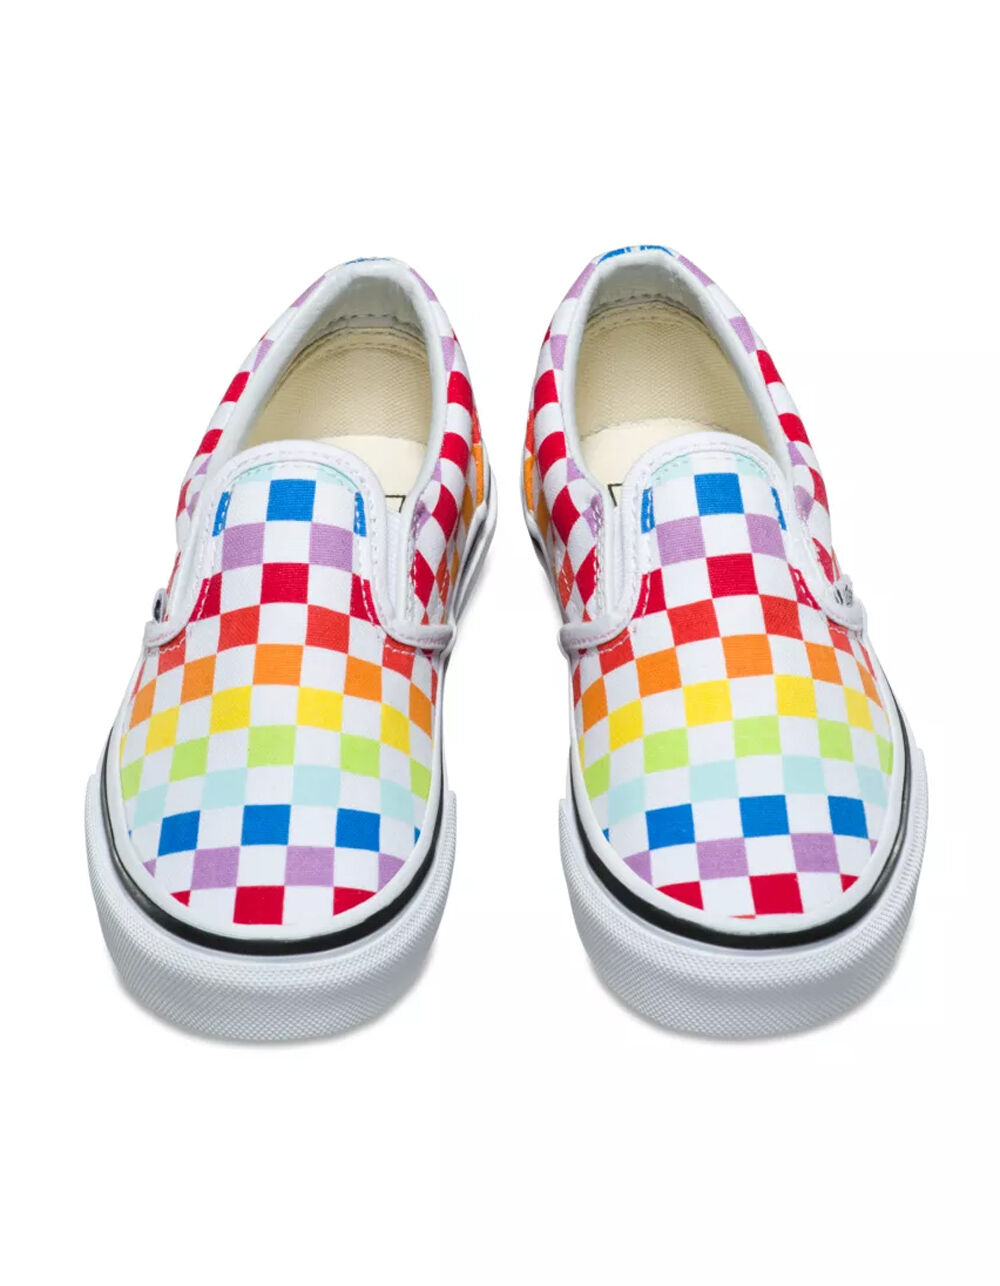 Rainbow Vans For Toddlers | lupon.gov.ph